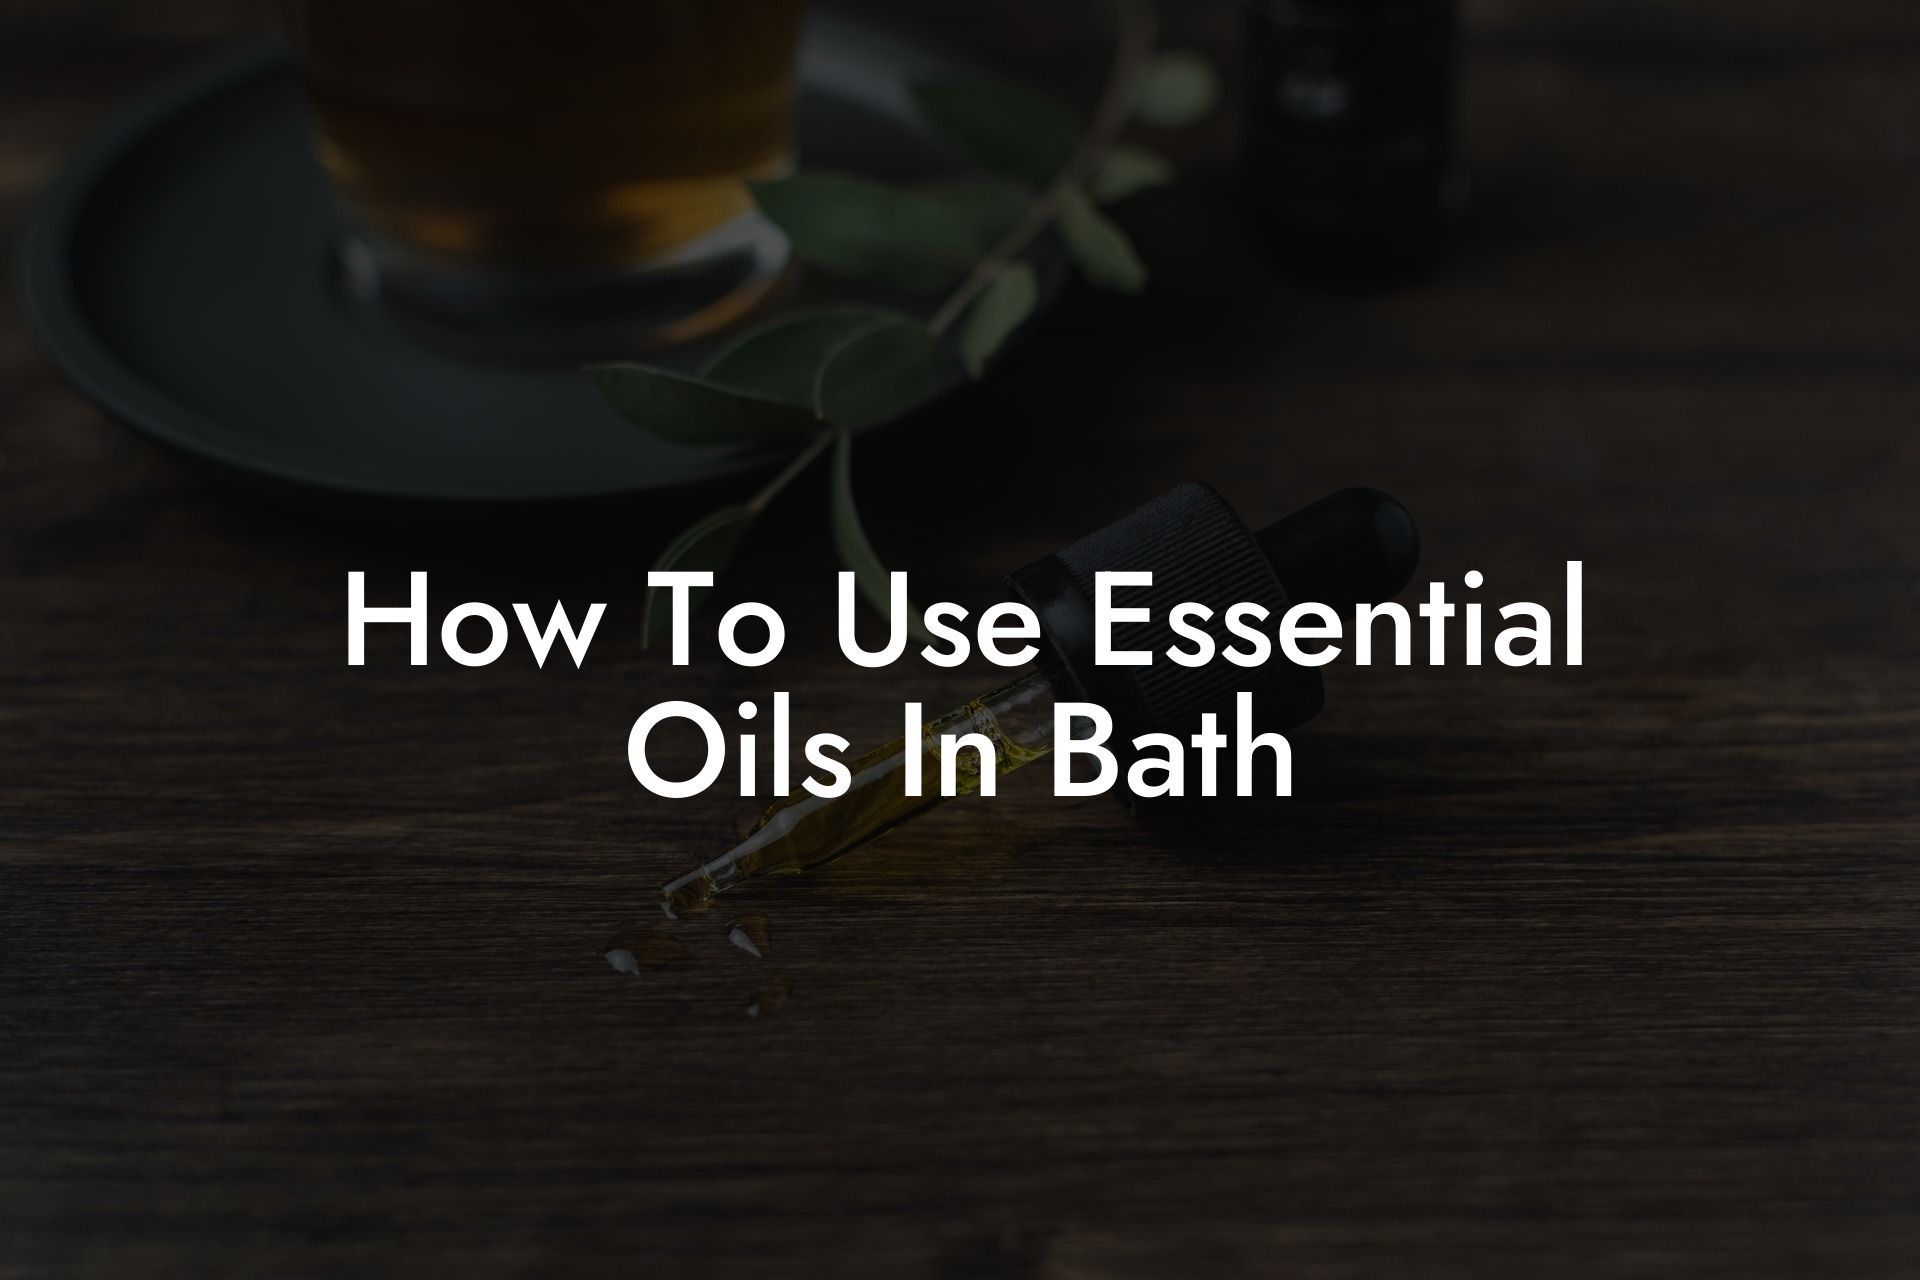 How To Use Essential Oils In Bath